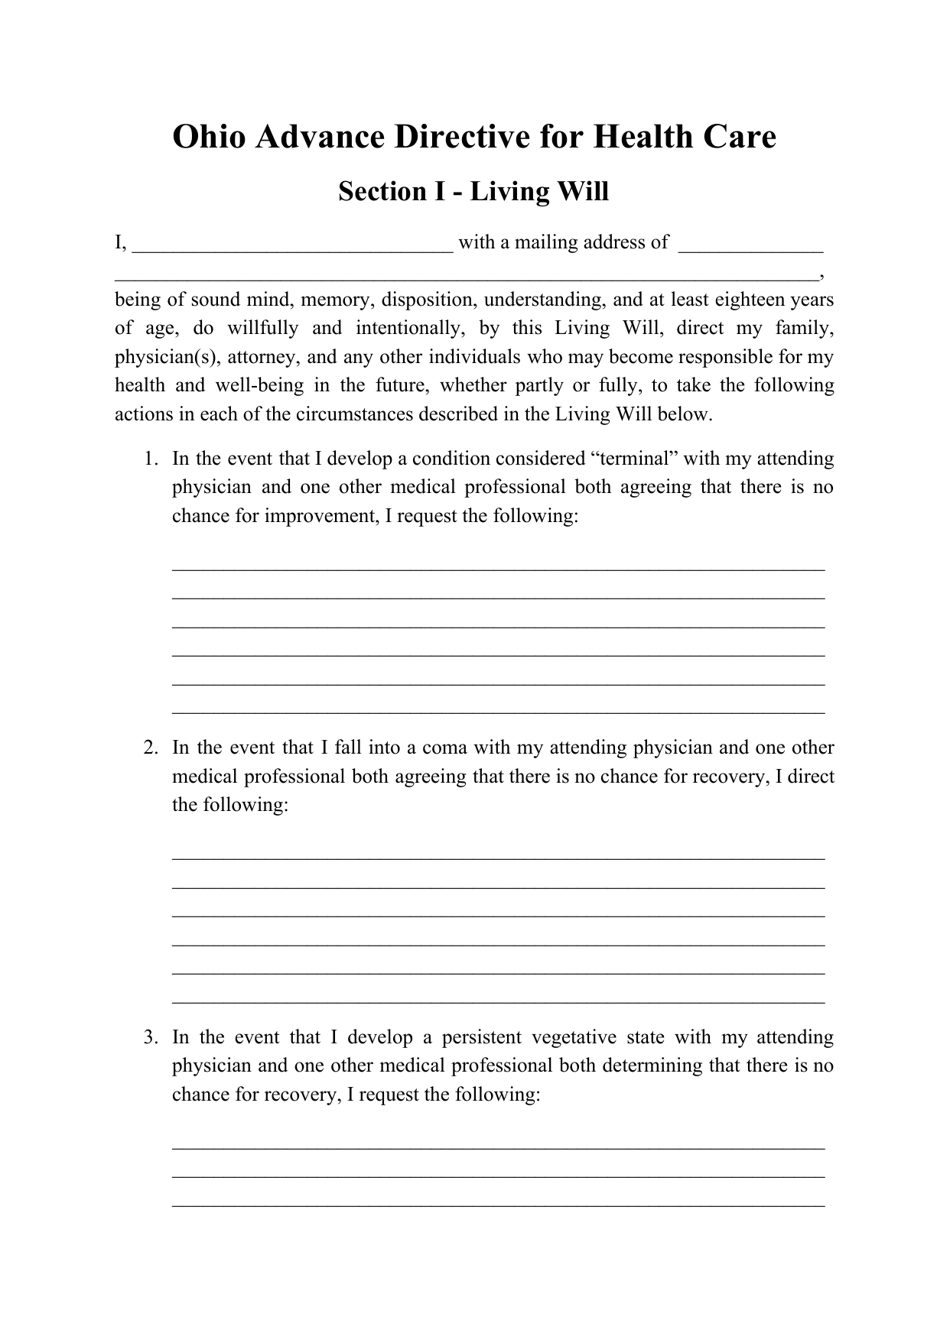 Advance Directive for Health Care Form - Ohio, Page 1